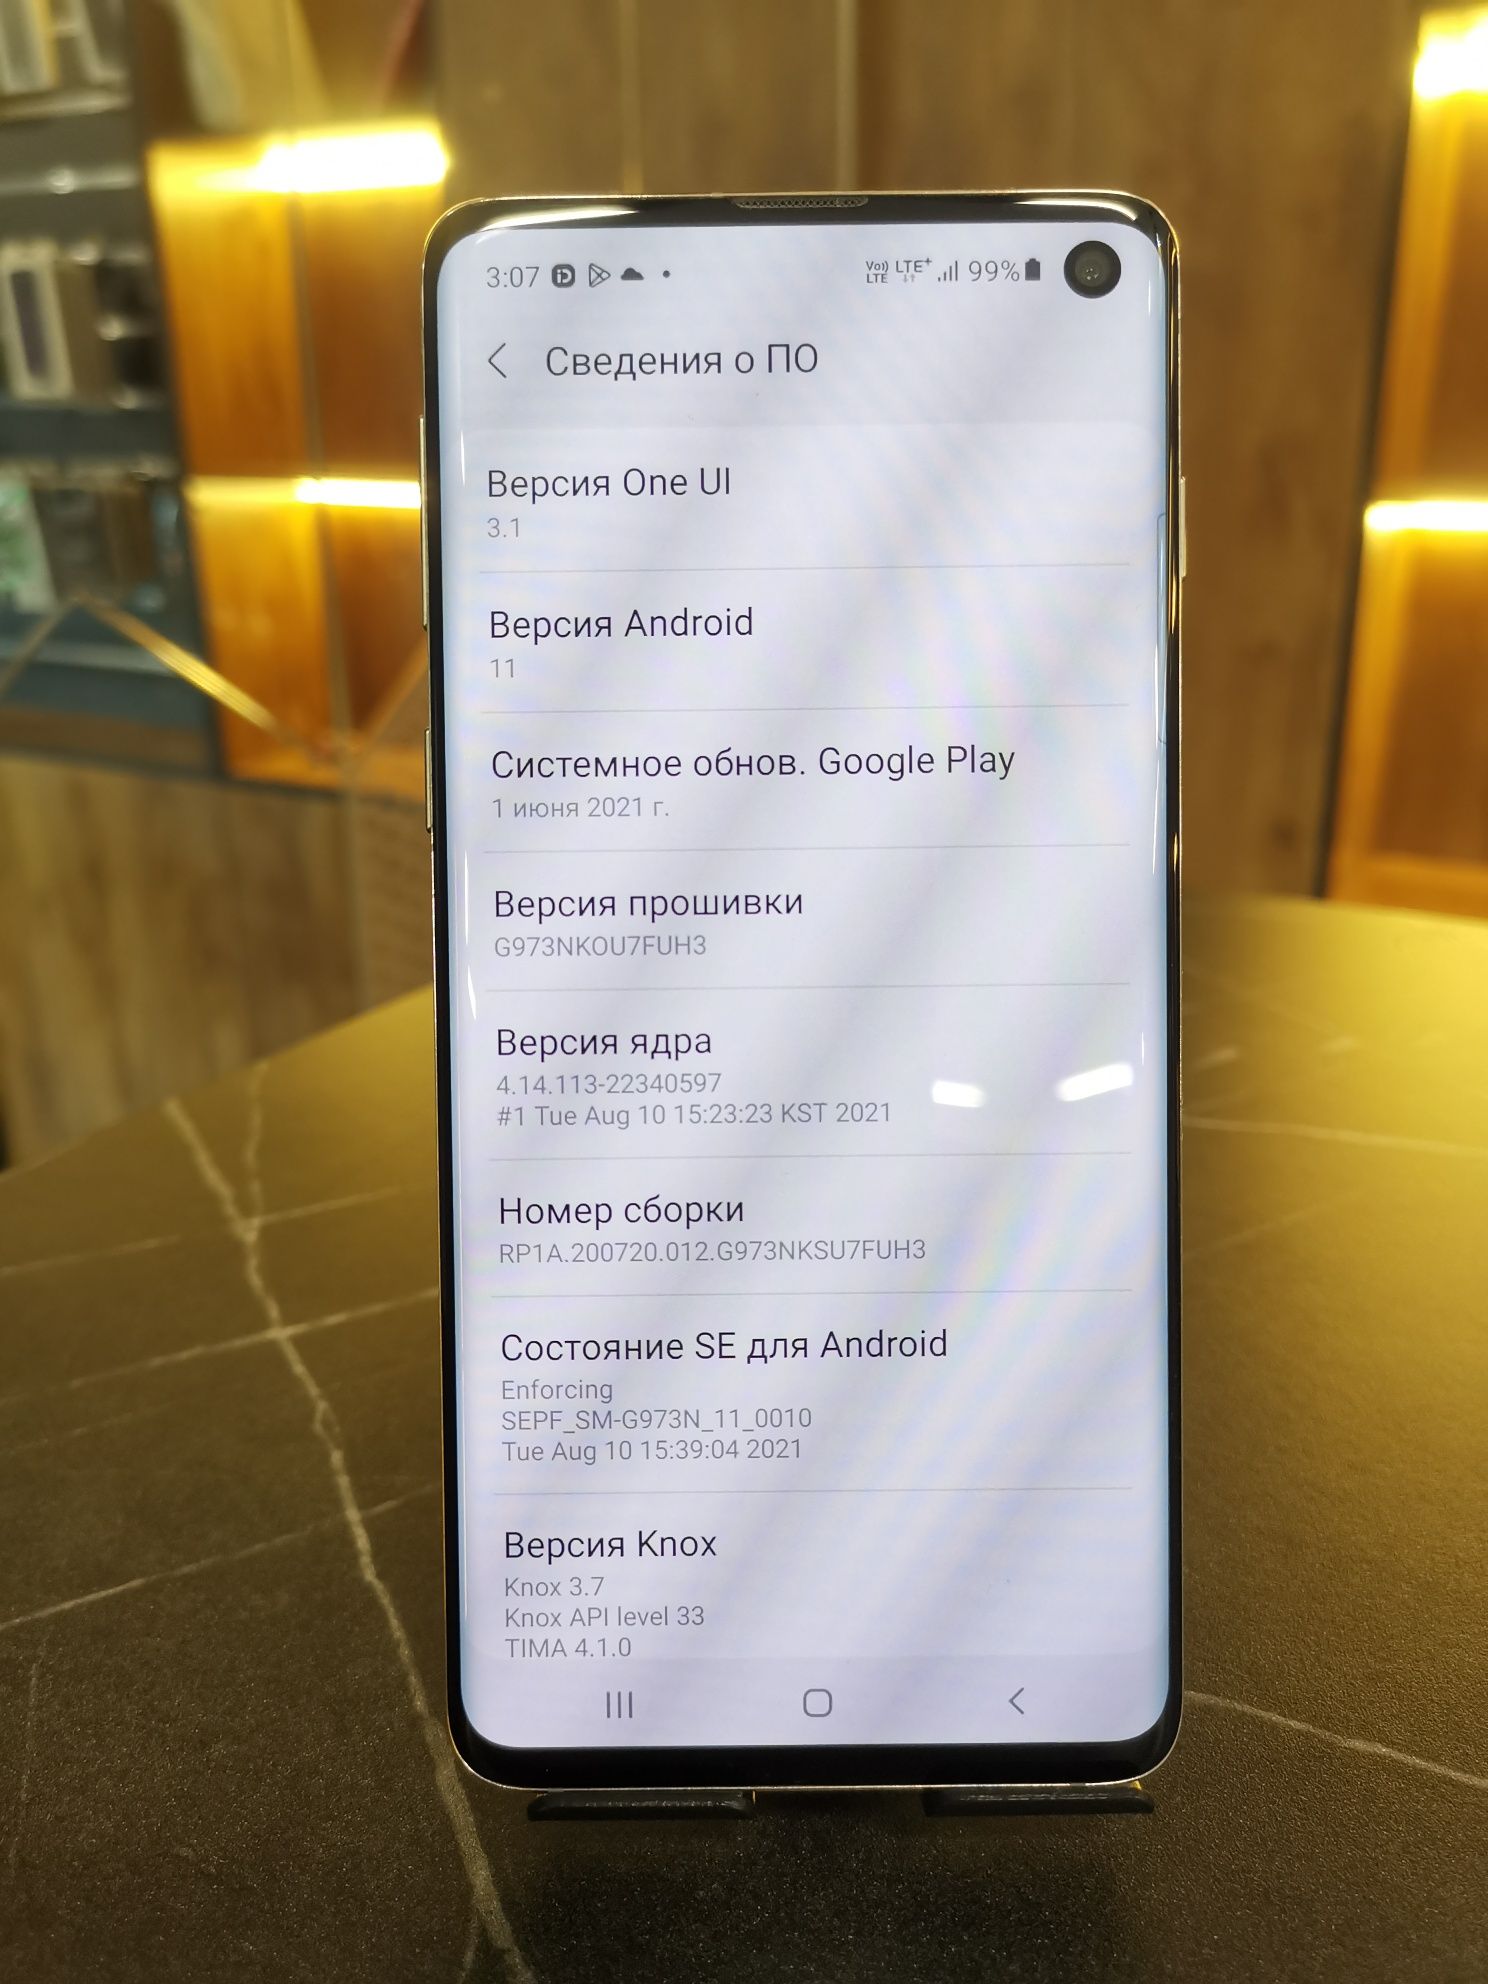 Samsung S10 11 version Android